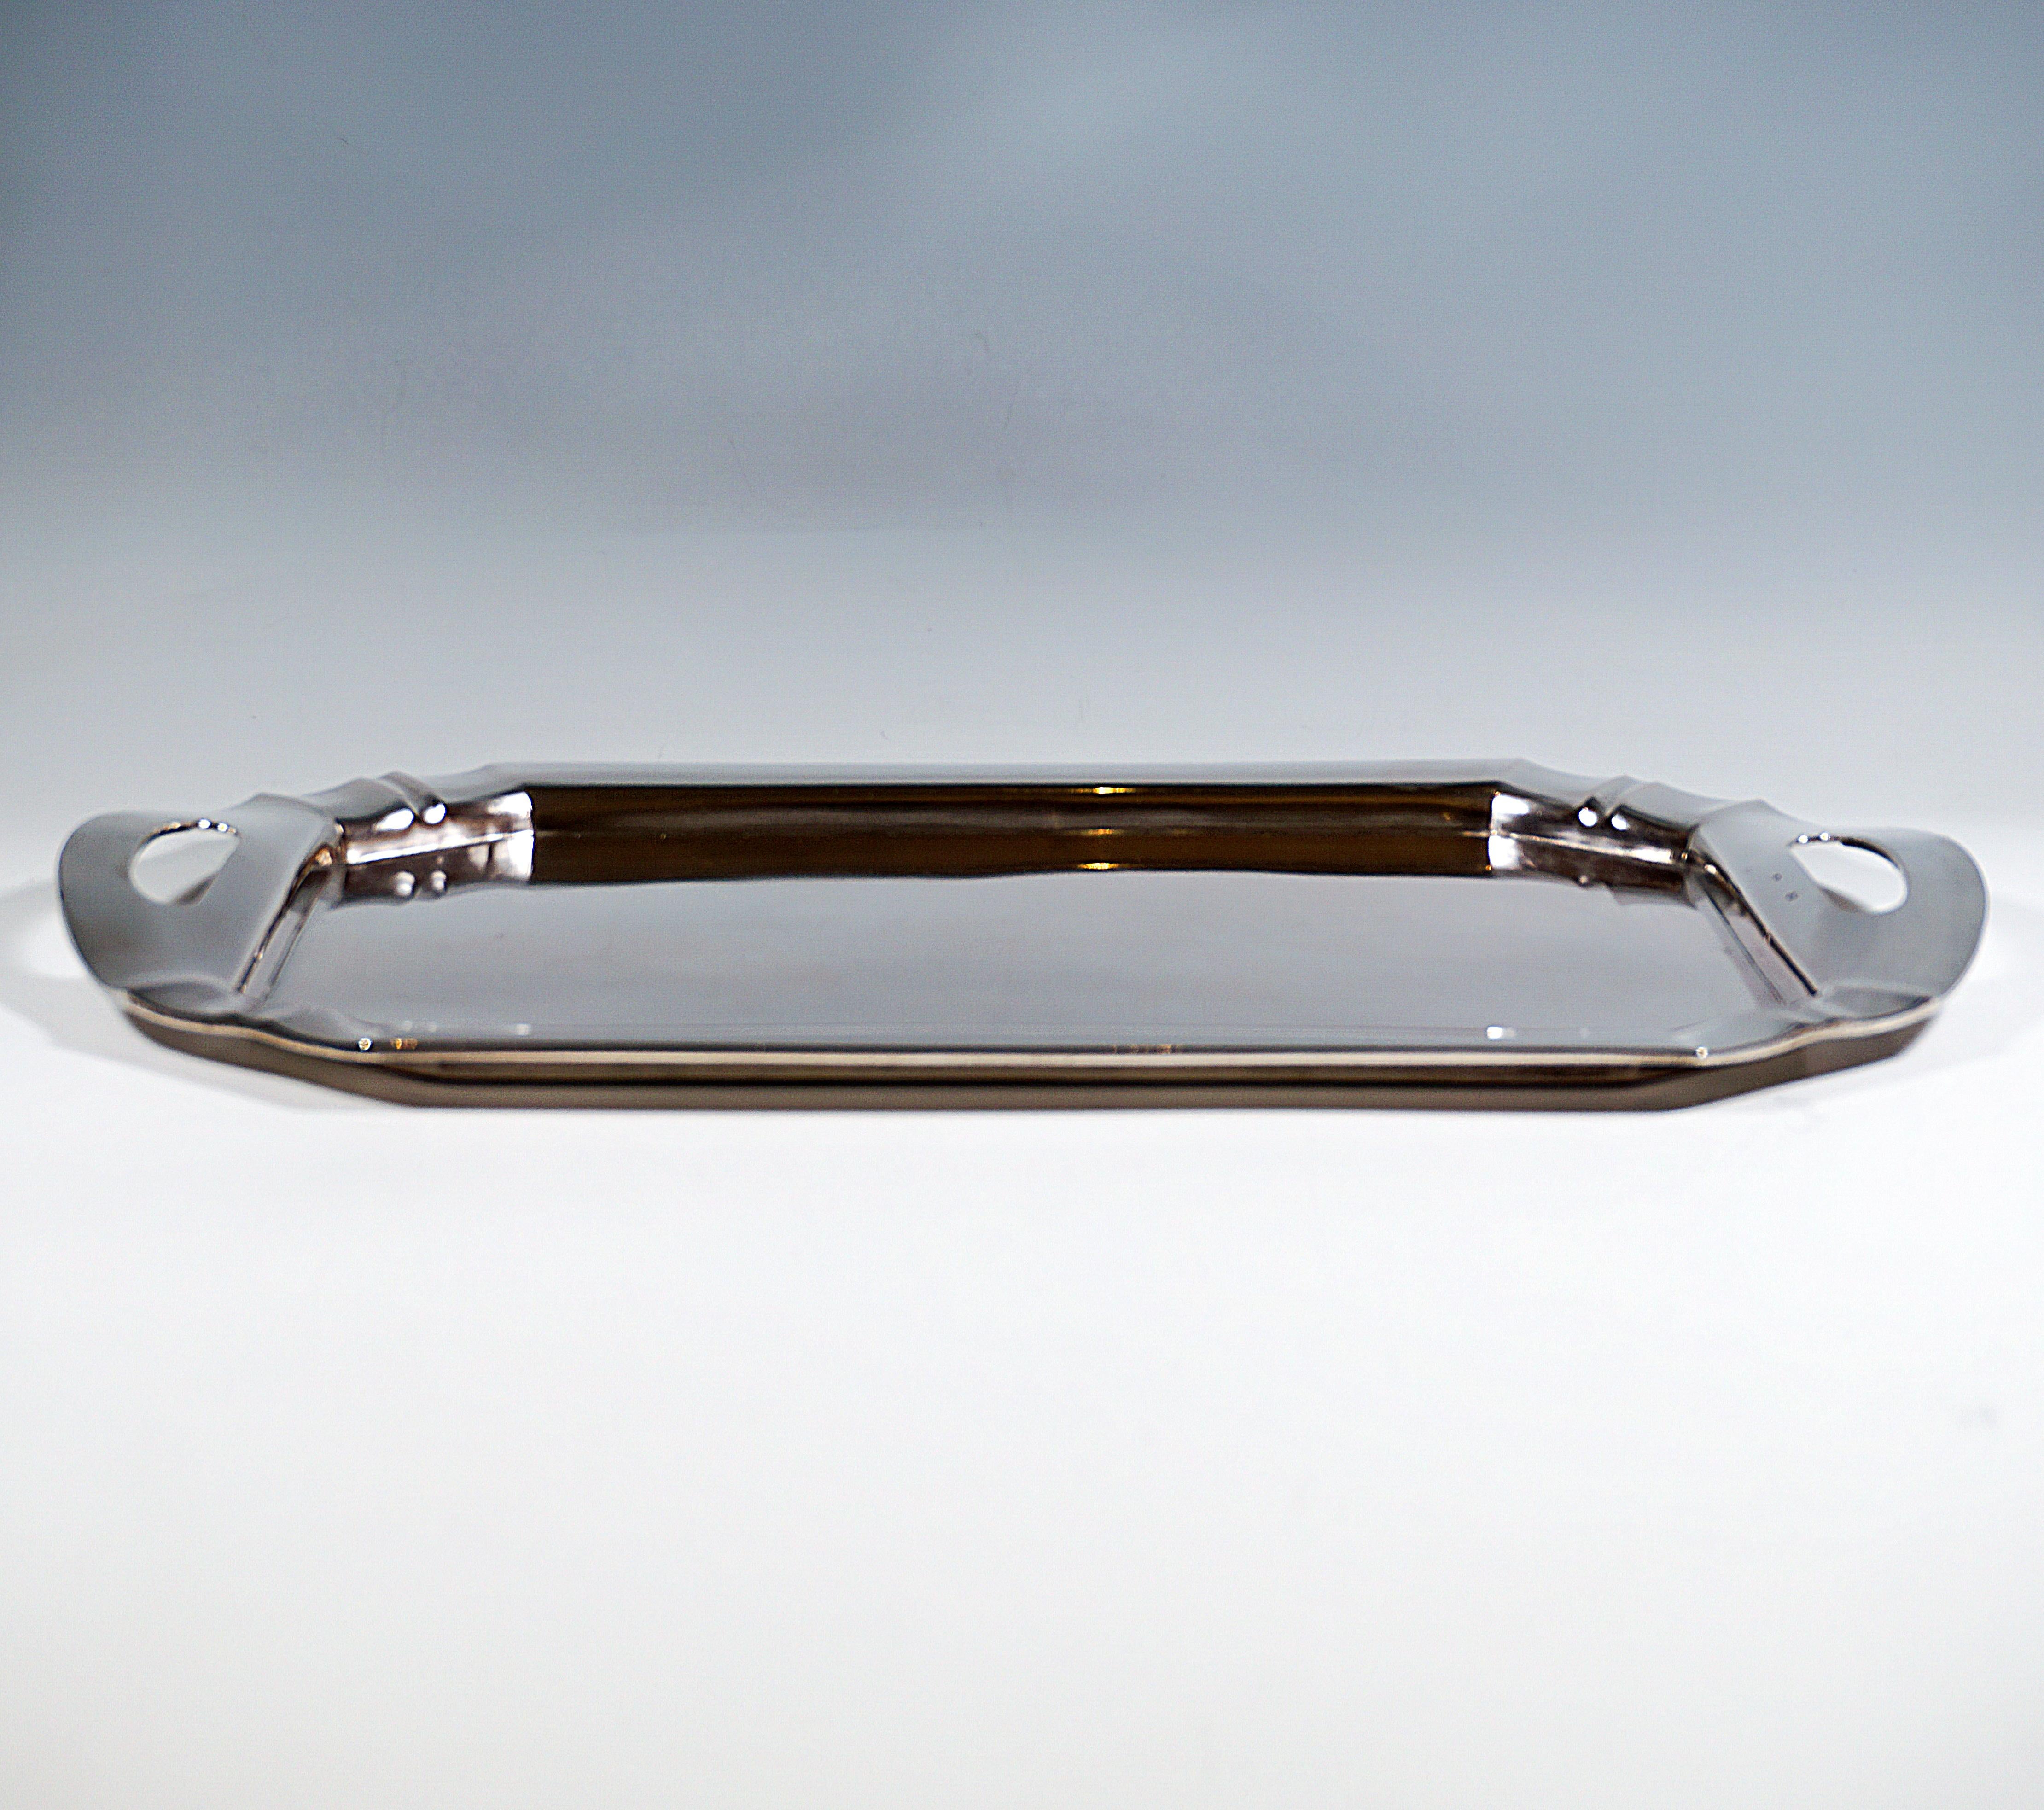 Hand-Crafted Elegant Viennese Silver Art Nouveau Tray, by Karl Berger, Around 1900 For Sale